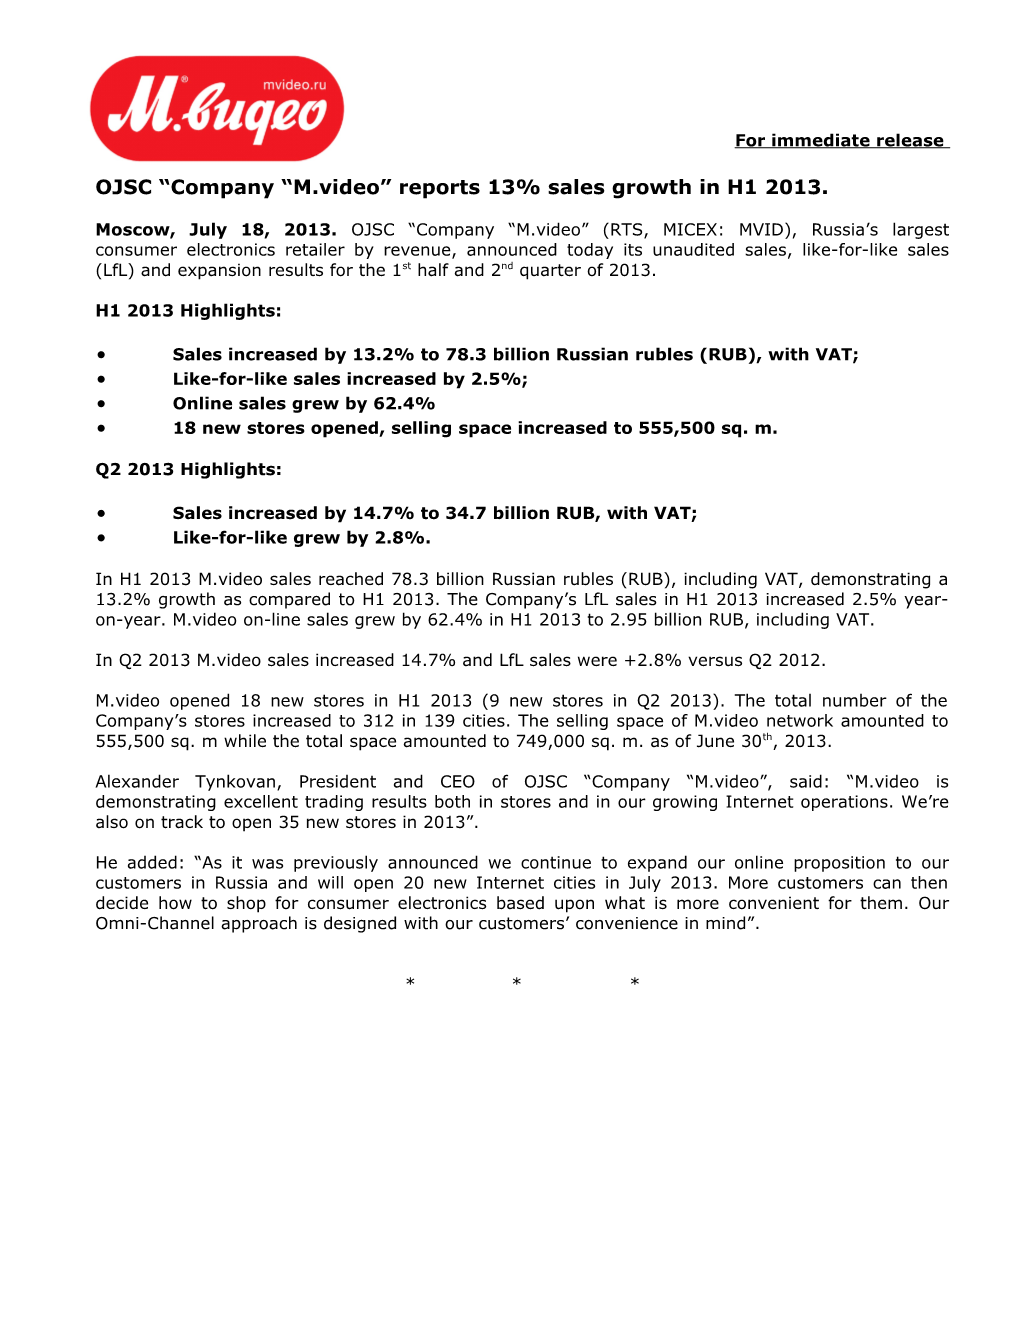 OJSC Company M.Video Reports 13% Sales Growth in H1 2013